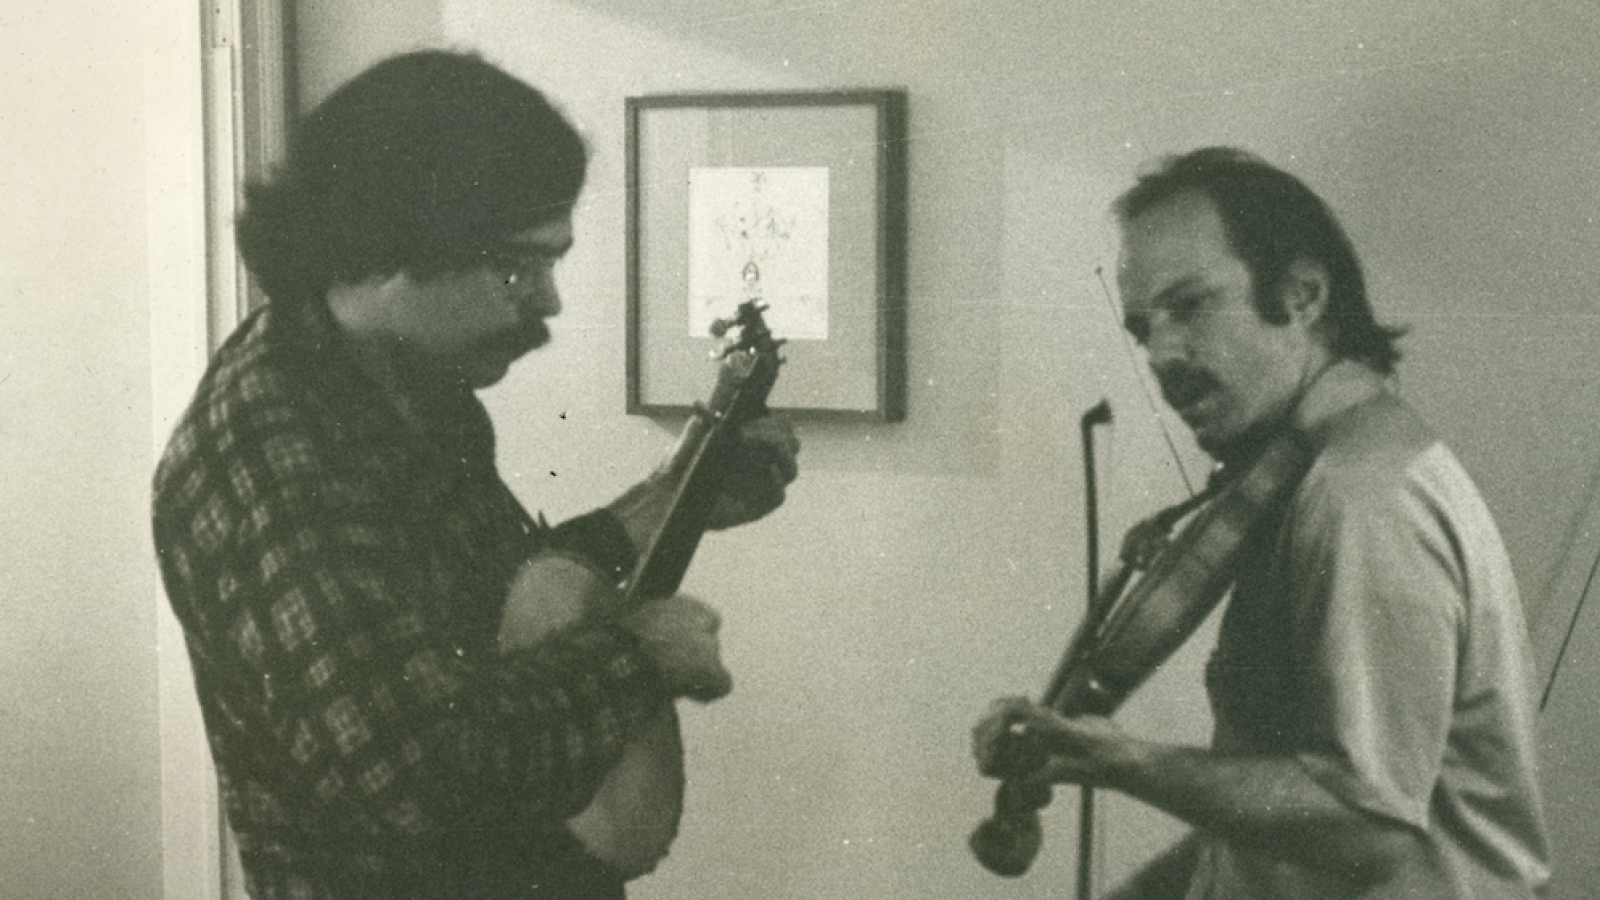 Unger playing banjo in living room with an unknown man, 1973